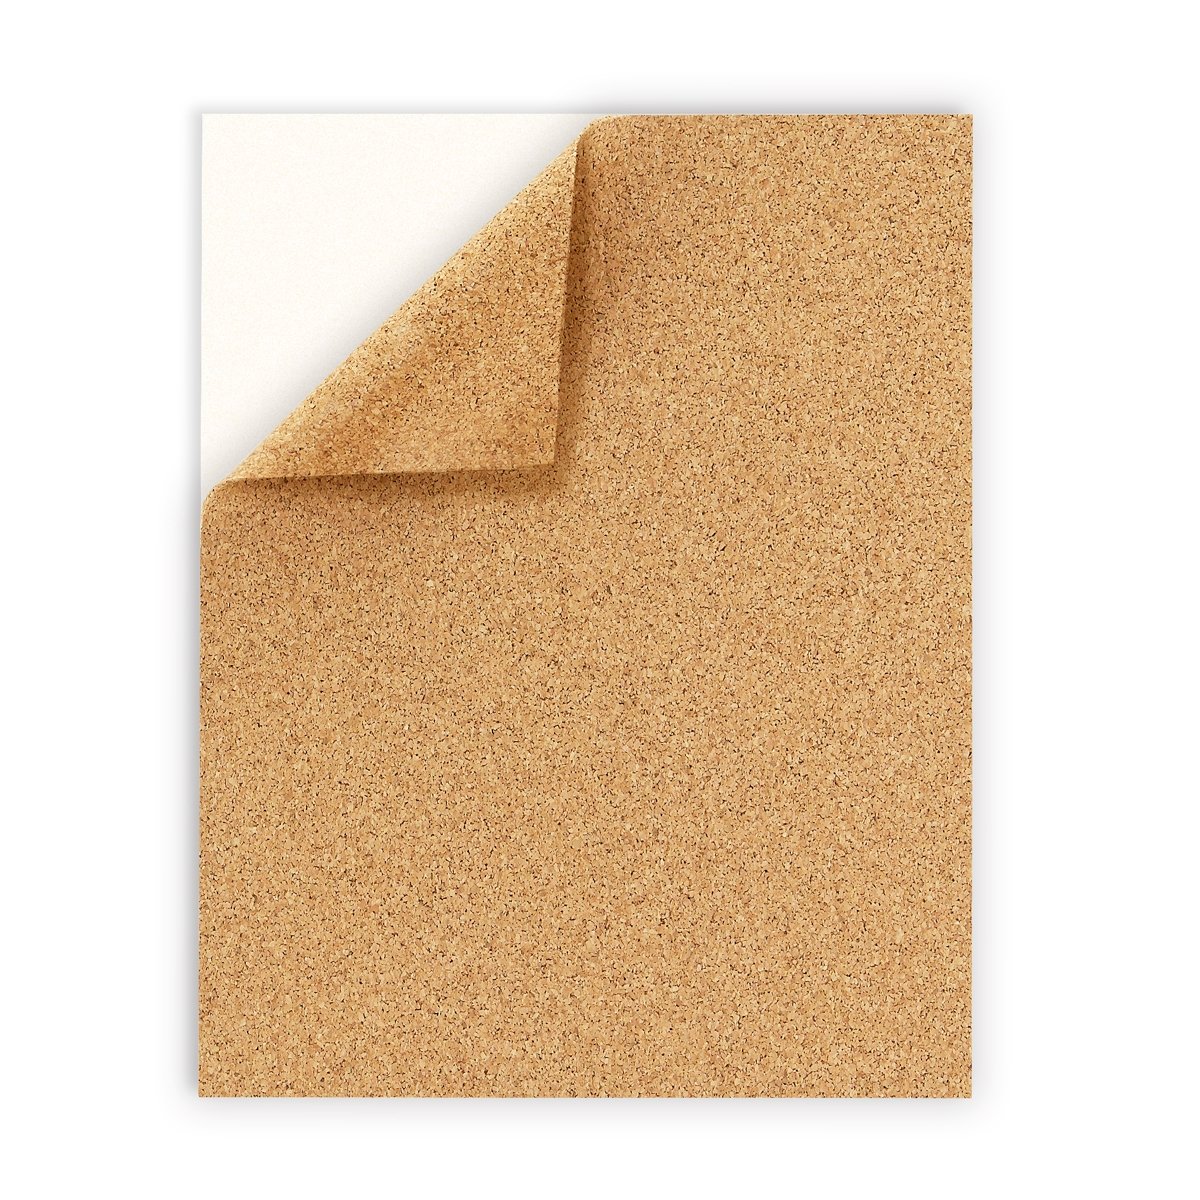 Natural Cork Sheet for Craft Products, 2mm, Non-self Adhesive